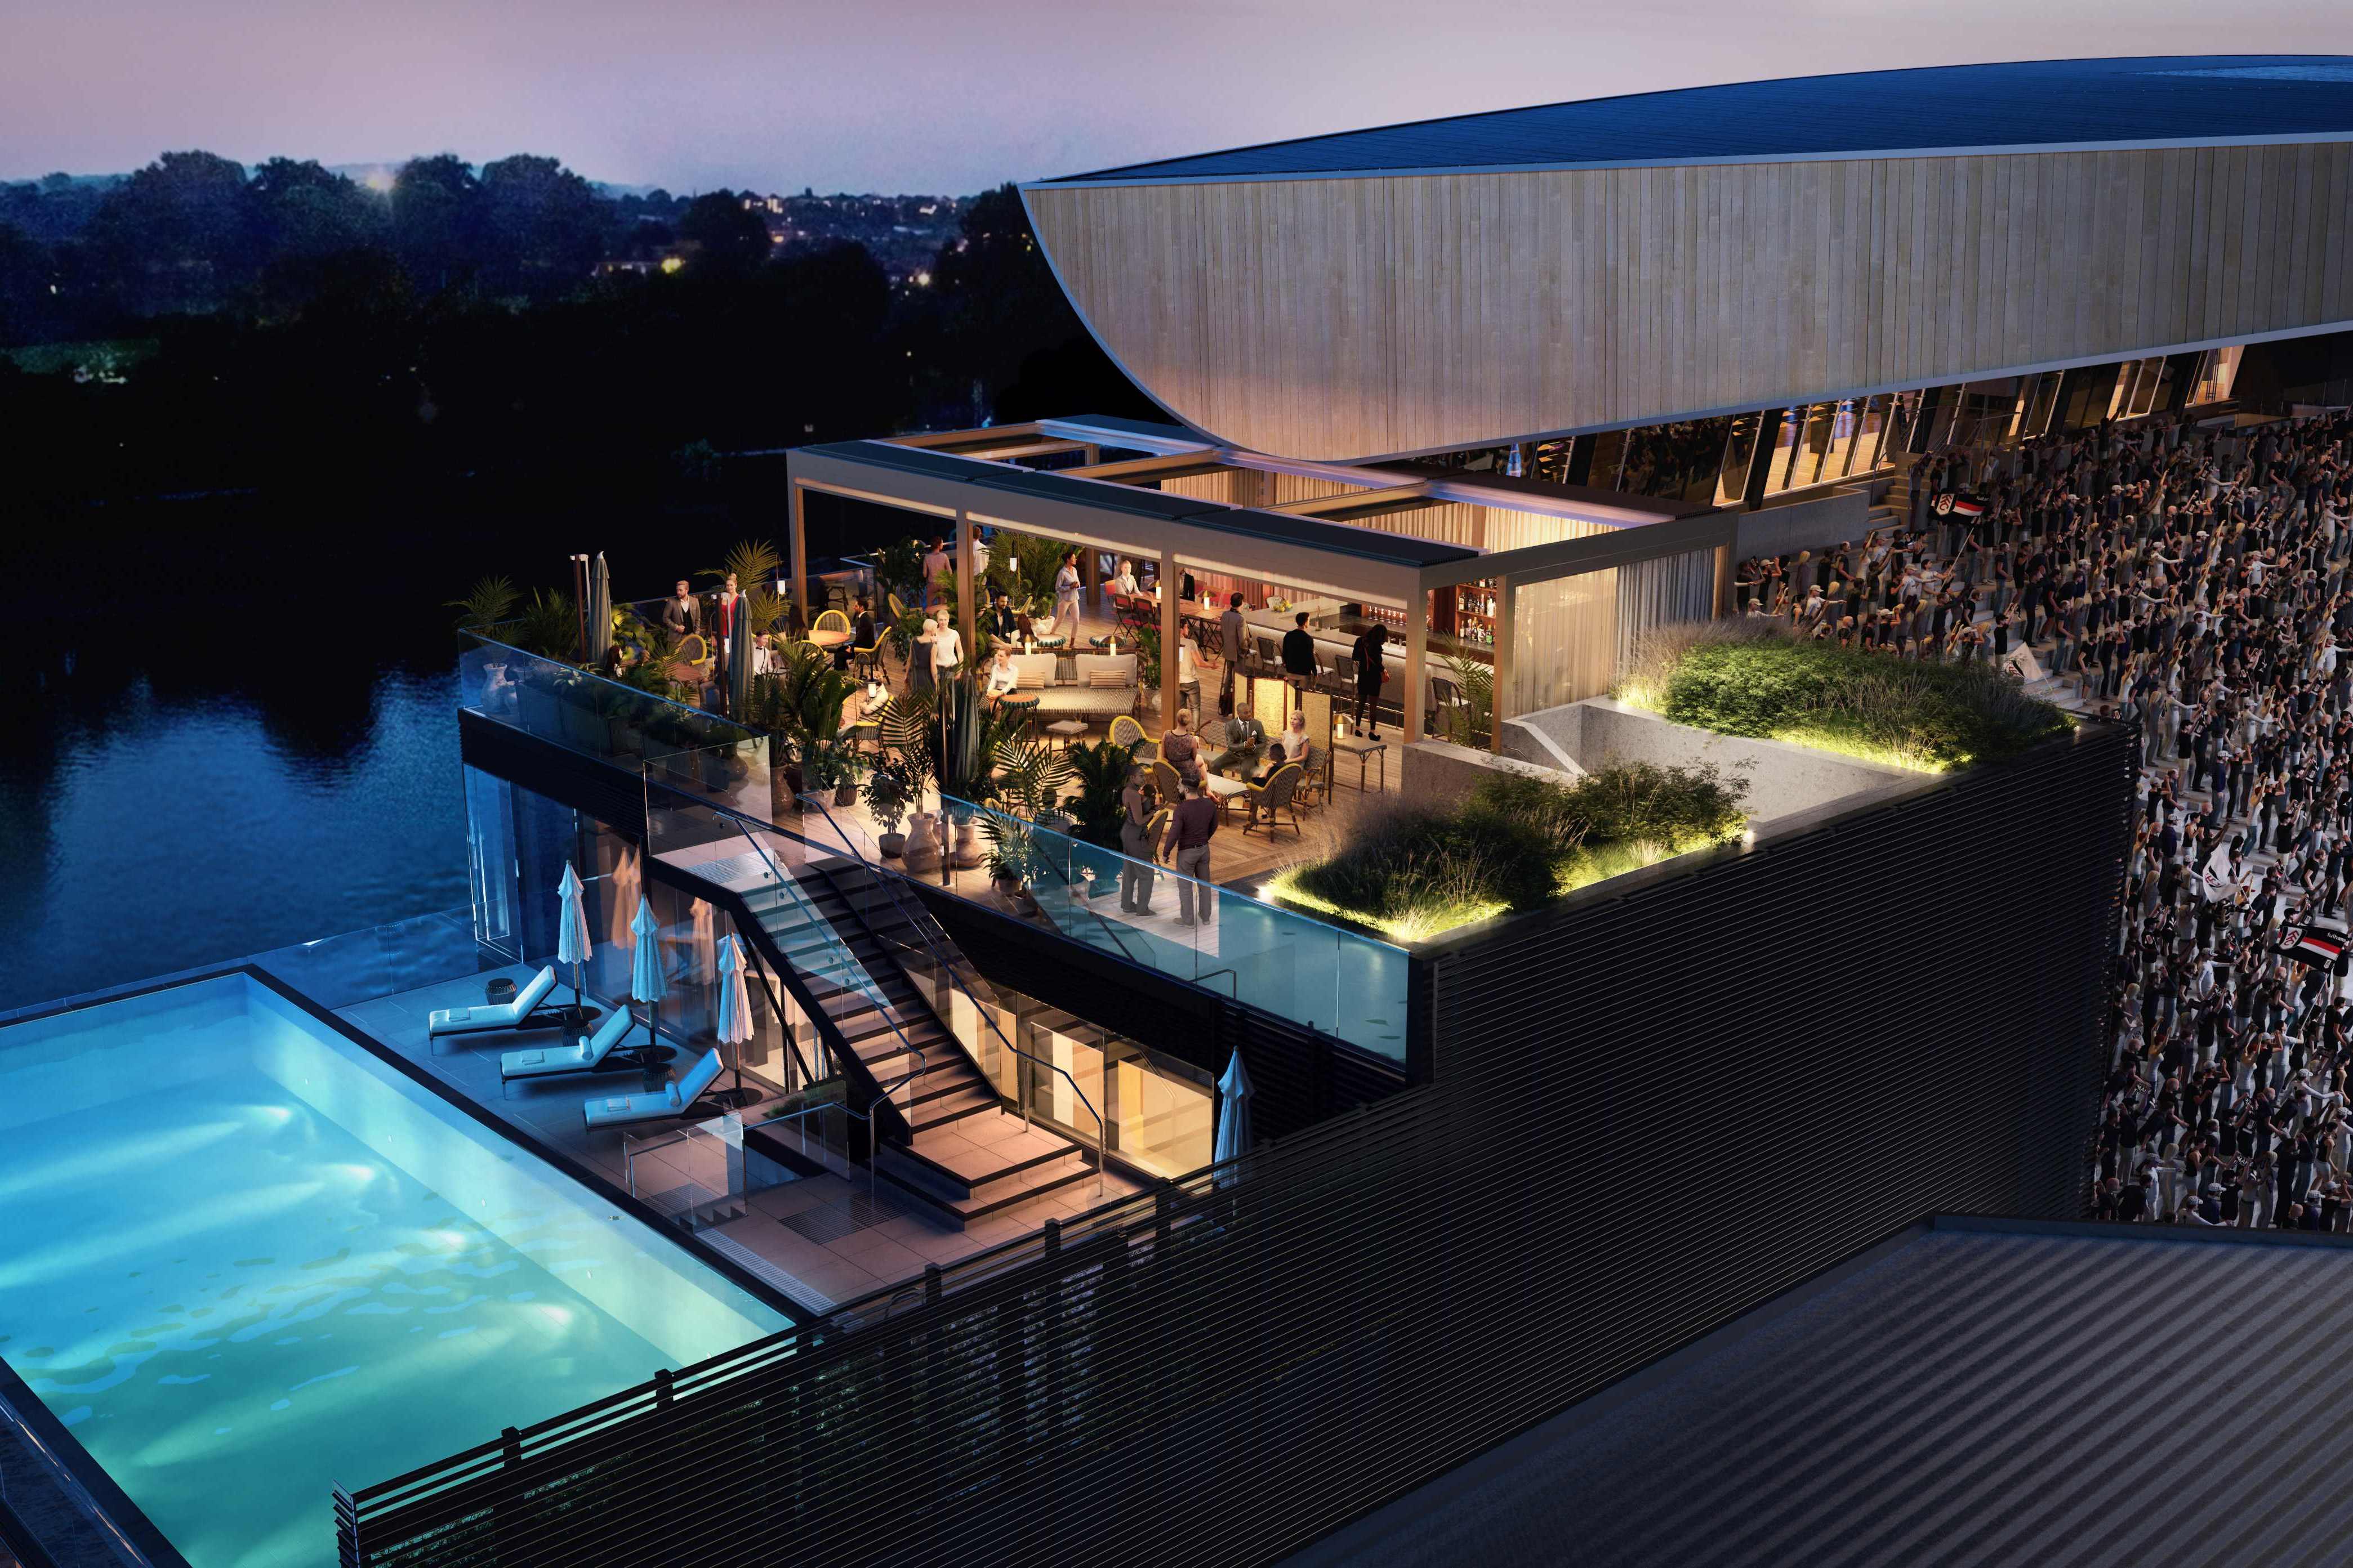 The rooftop swimming pool makes the new stand at Craven Cottage the swankiest in the world